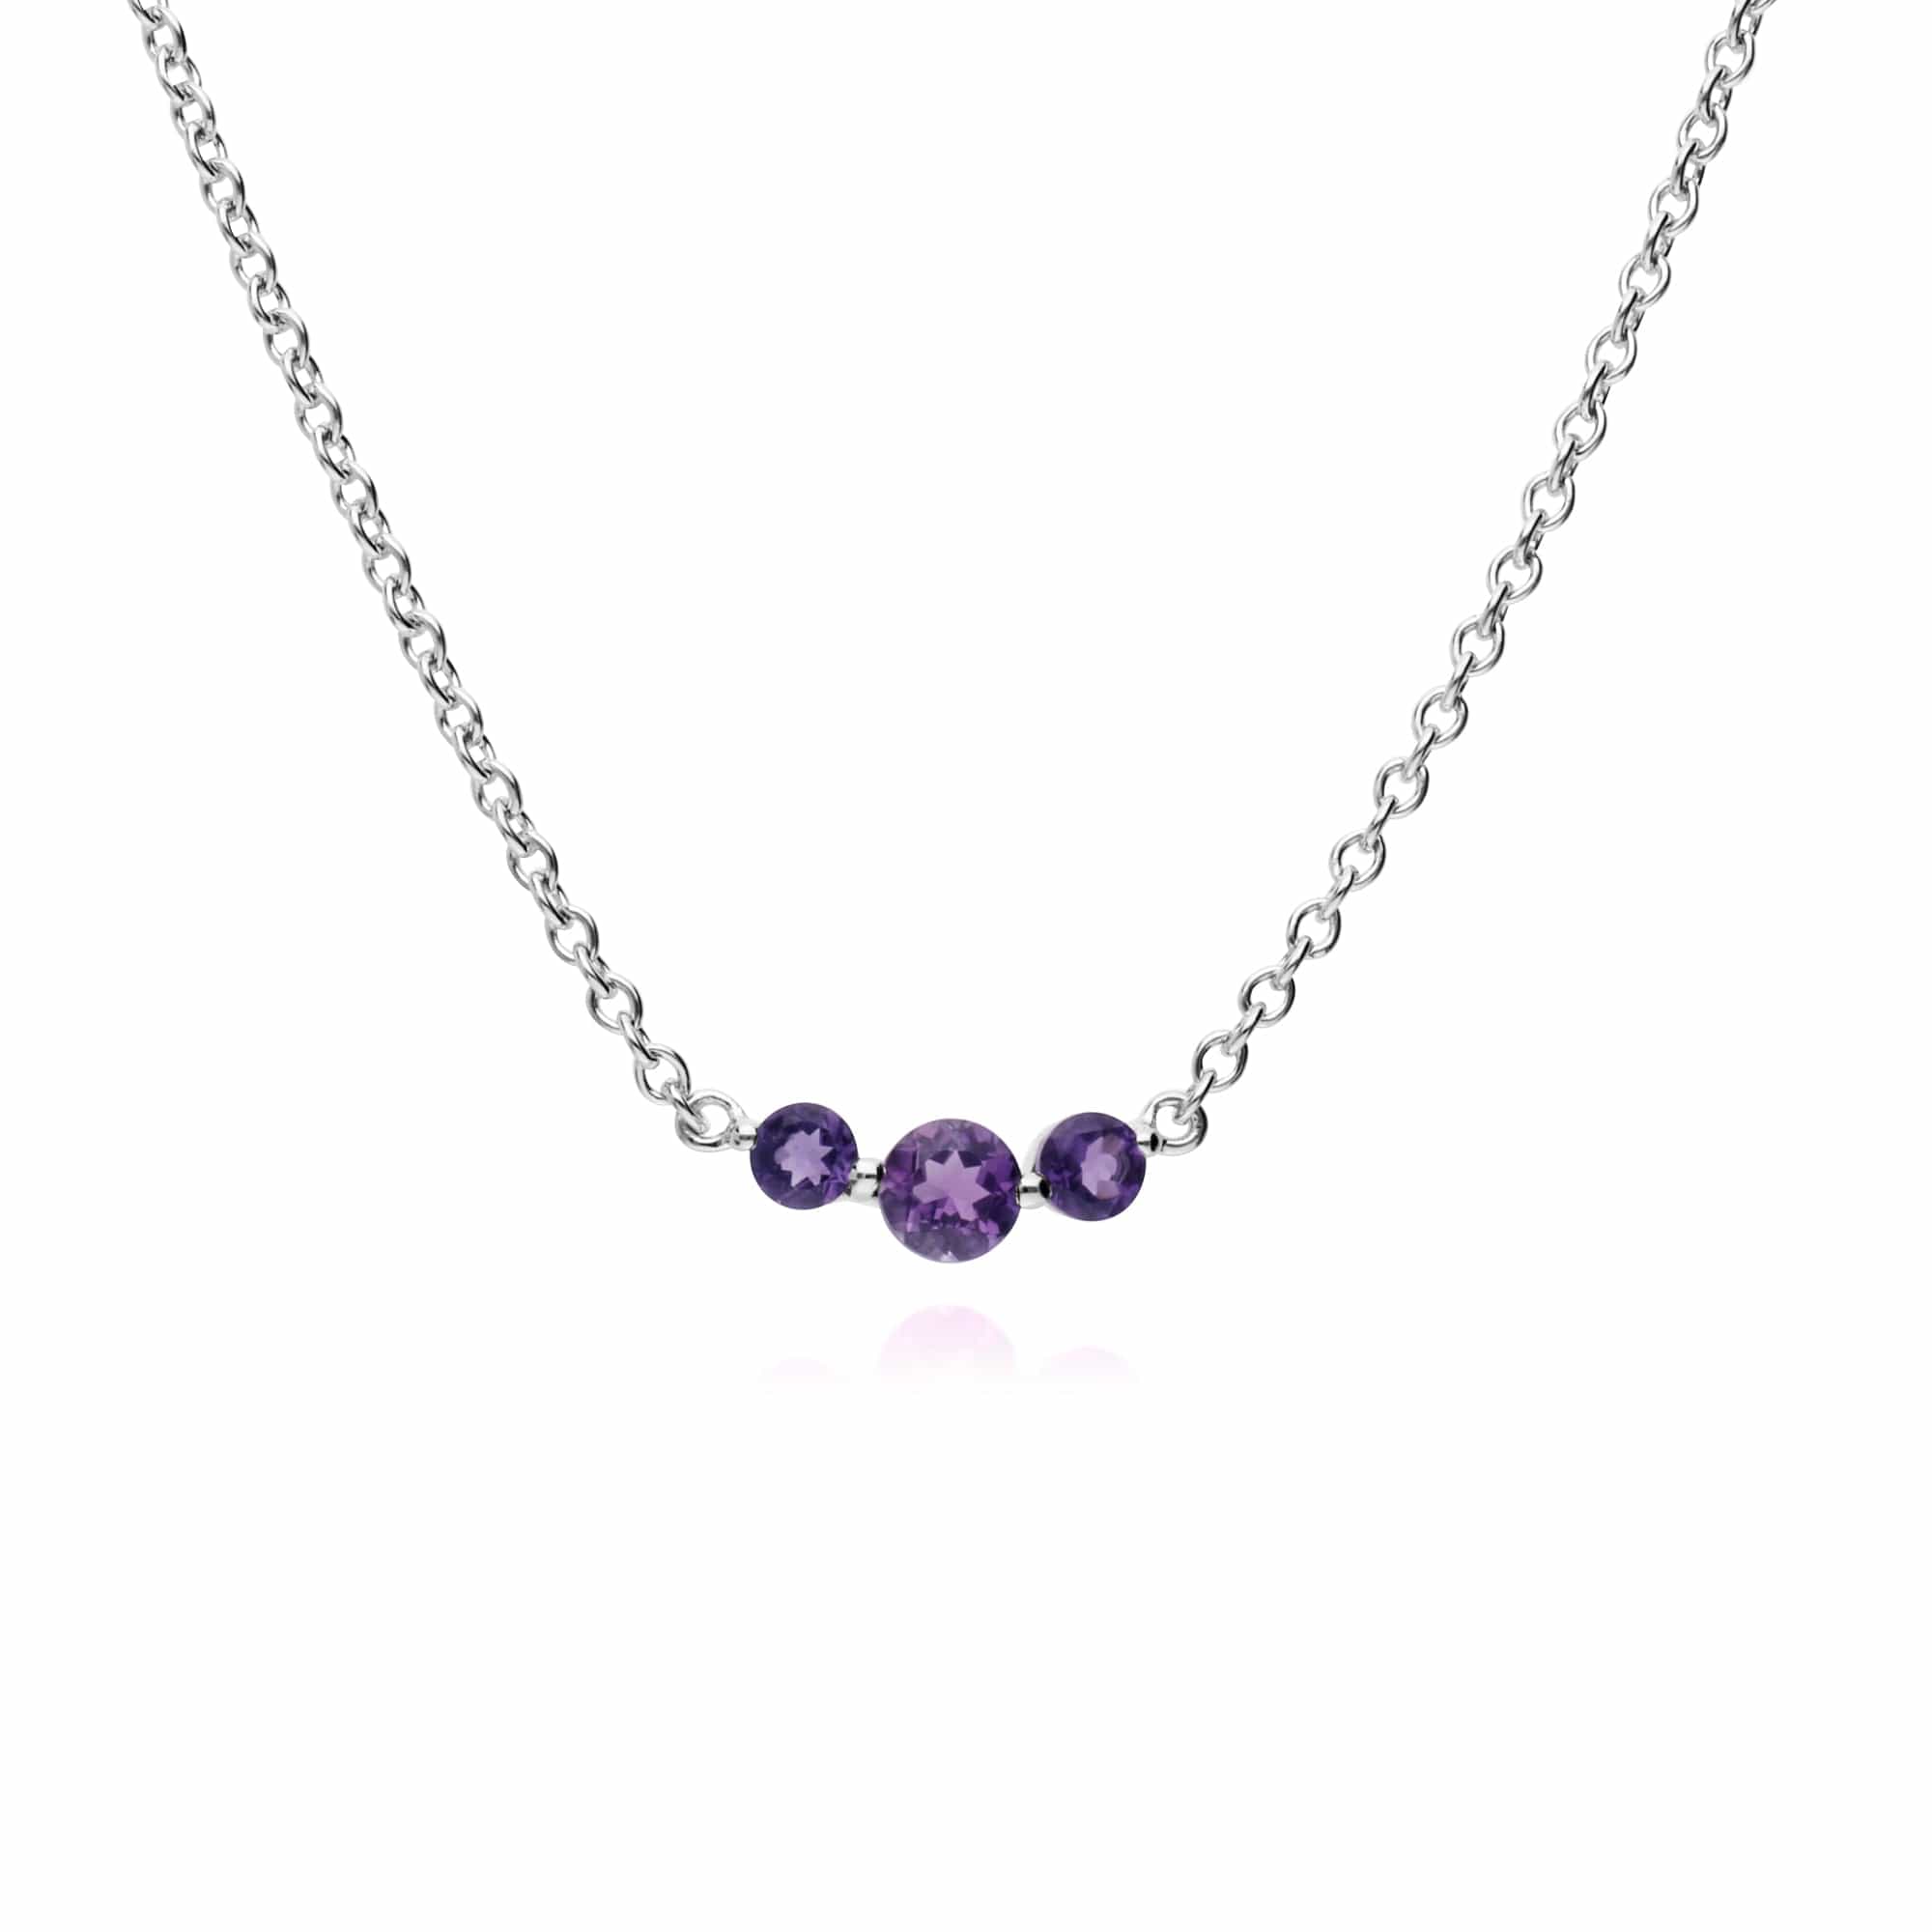 270E025503925-270N034203925 Classic Round Amethyst Three Stone Gradient Earrings & Necklace Set in 925 Sterling Silver 3